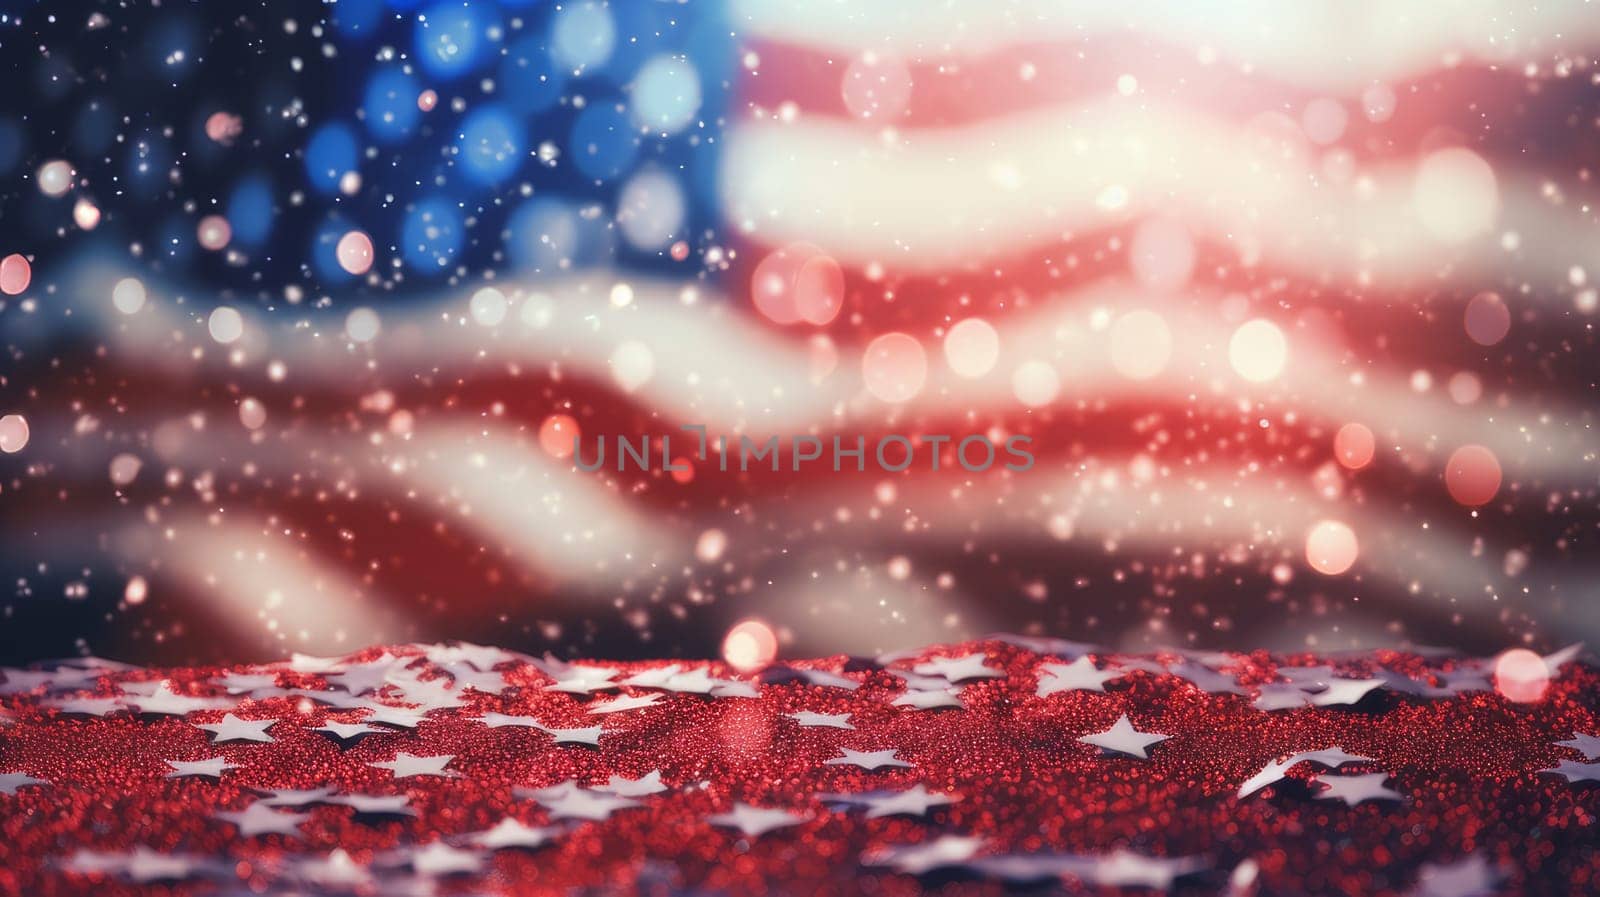 Festive salute, fireworks against the background of the flag of the United States of America. American President's Day, USA Independence Day, American flag colors background, 4 July, February holiday, stars and stripes, red and blue